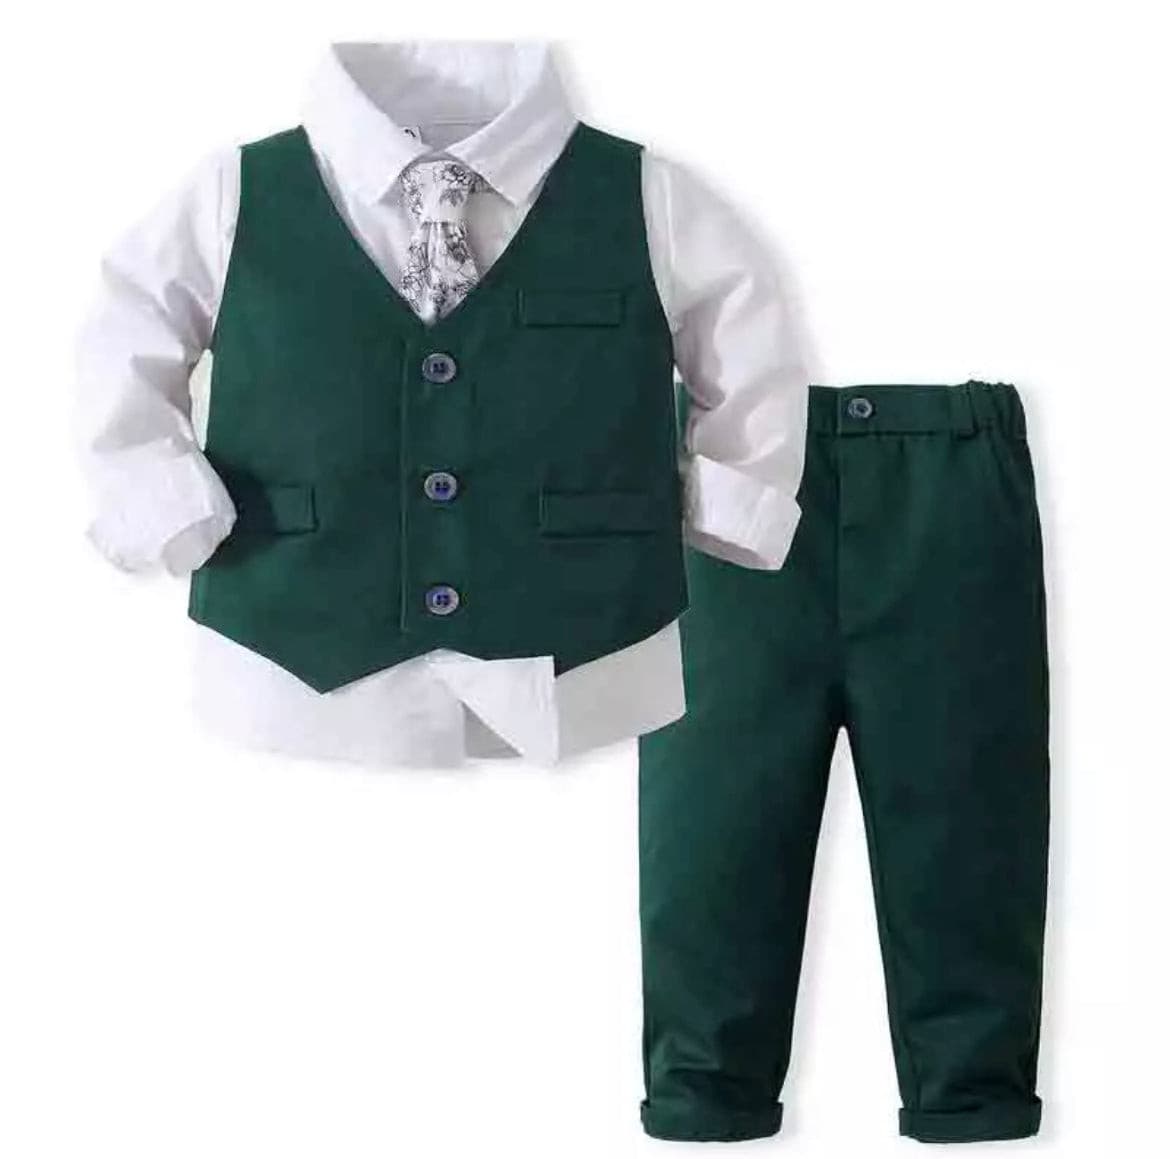 Gatsby Suit - Green & White.